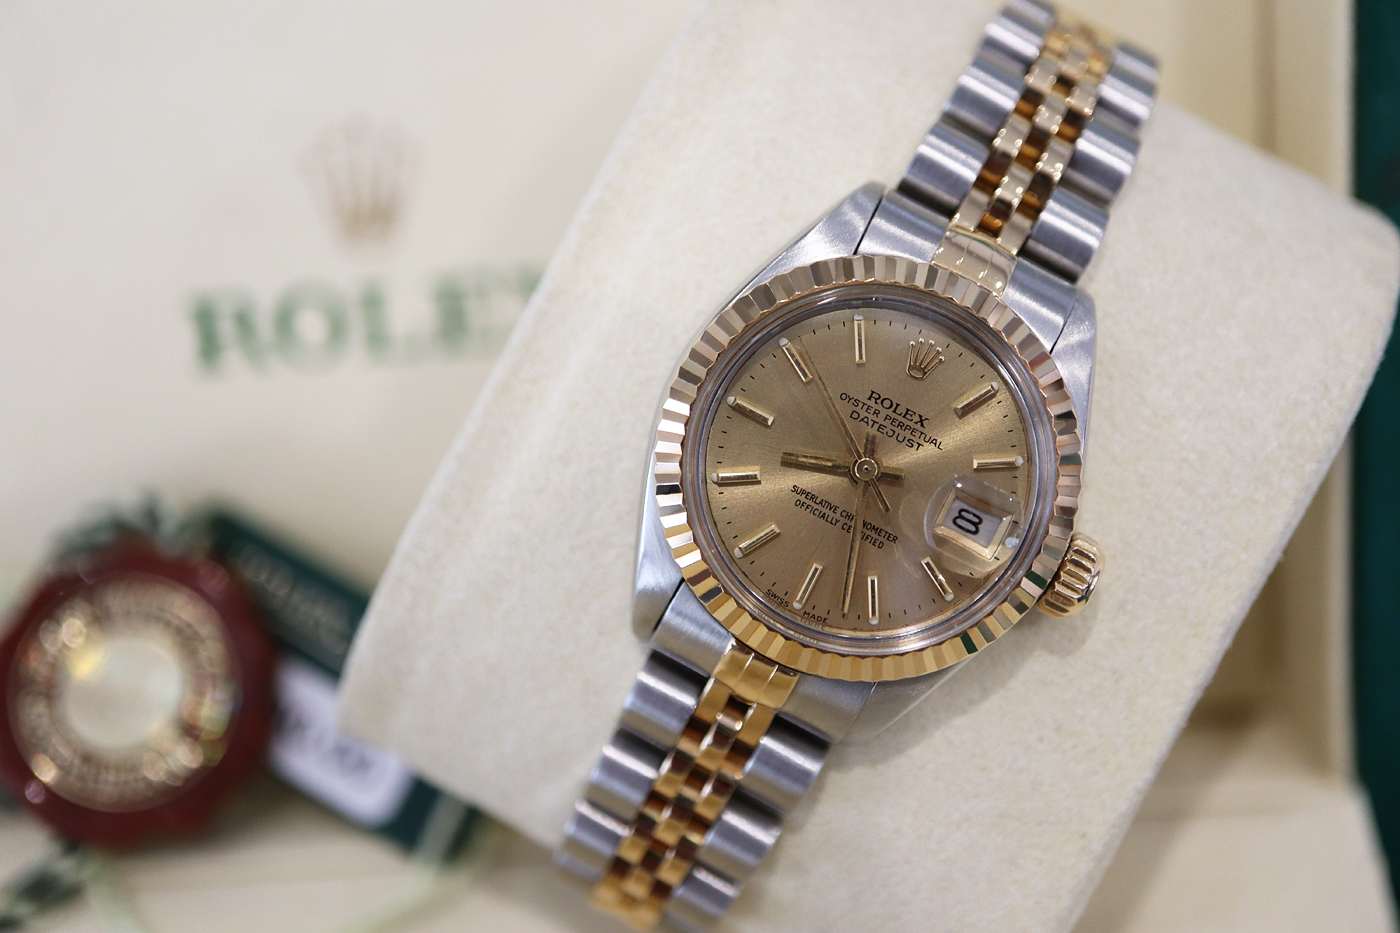 ROLEX DATEJUST 18K / STEEL *CHAMPAGNE* - BOX SET / BOOKLETS / TAGS - Image 3 of 13